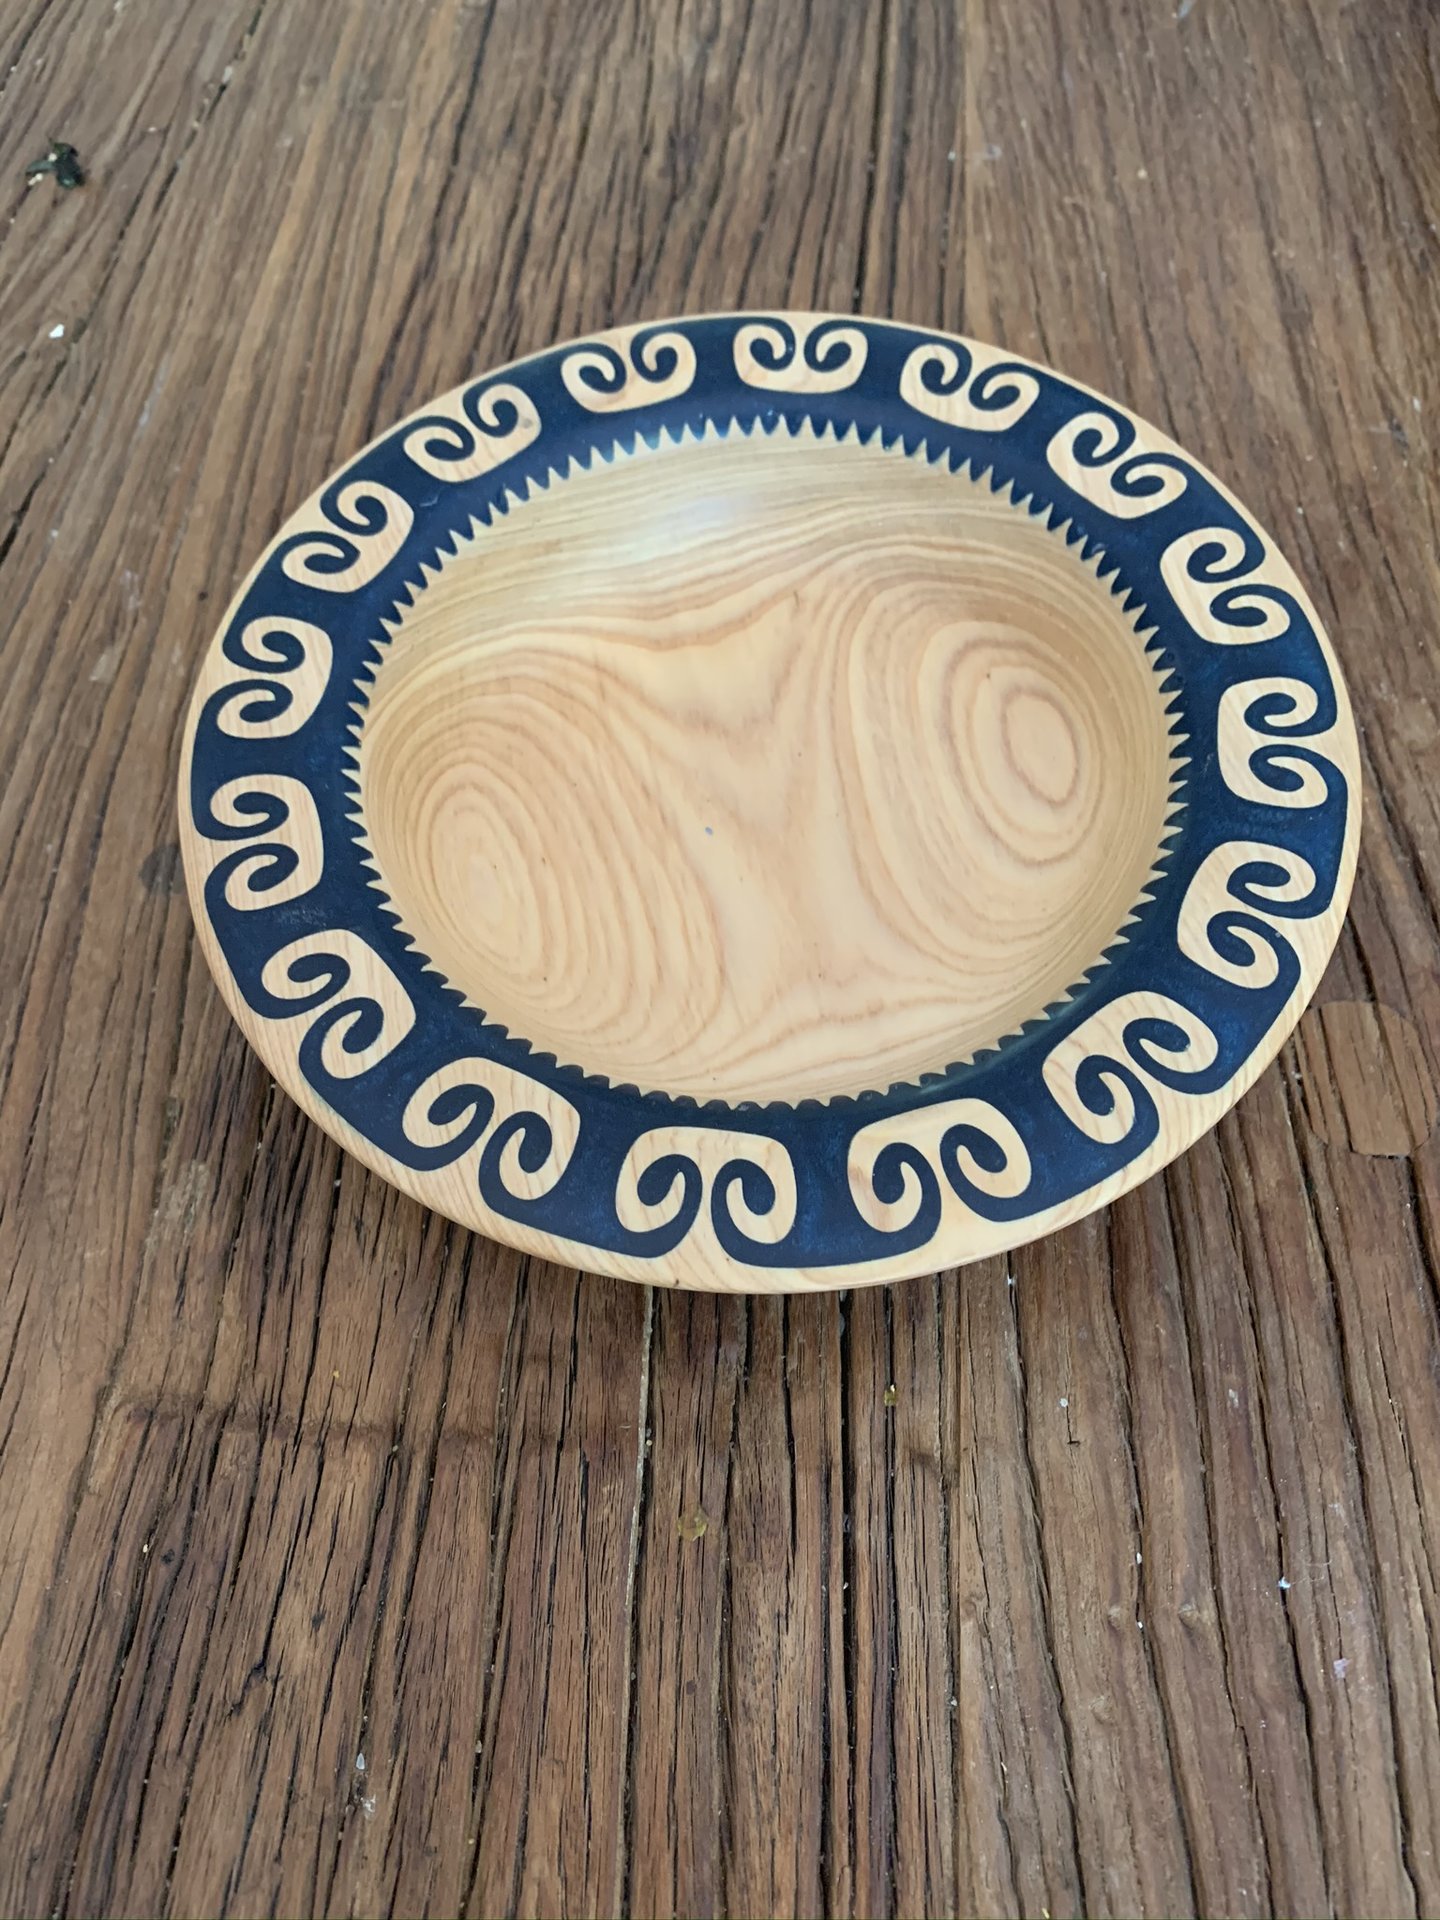 Cypress bowl with inlays | American Association of Woodturners